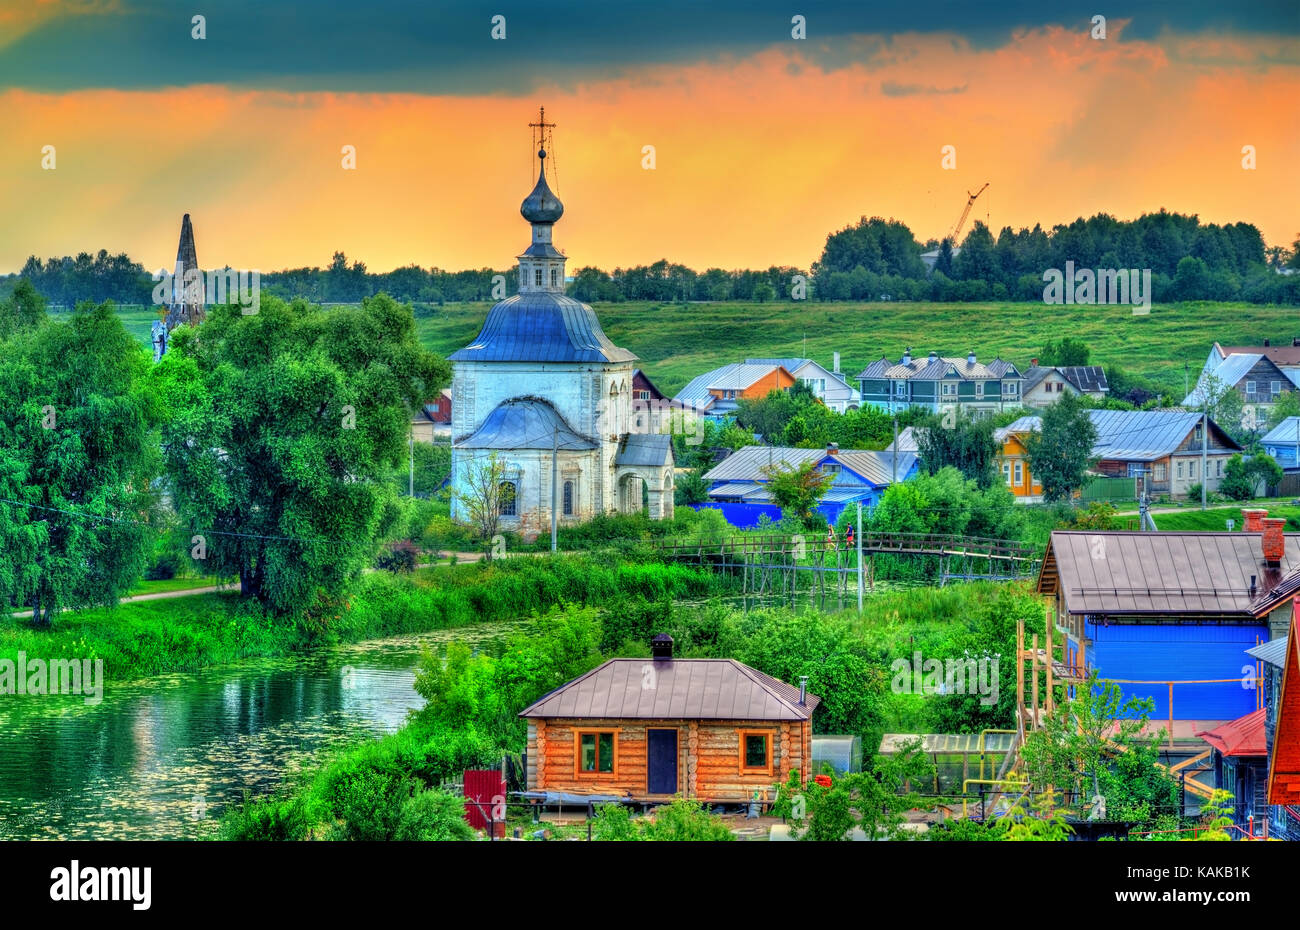 Churche of the Epiphany in Suzdal, Russia Stock Photo